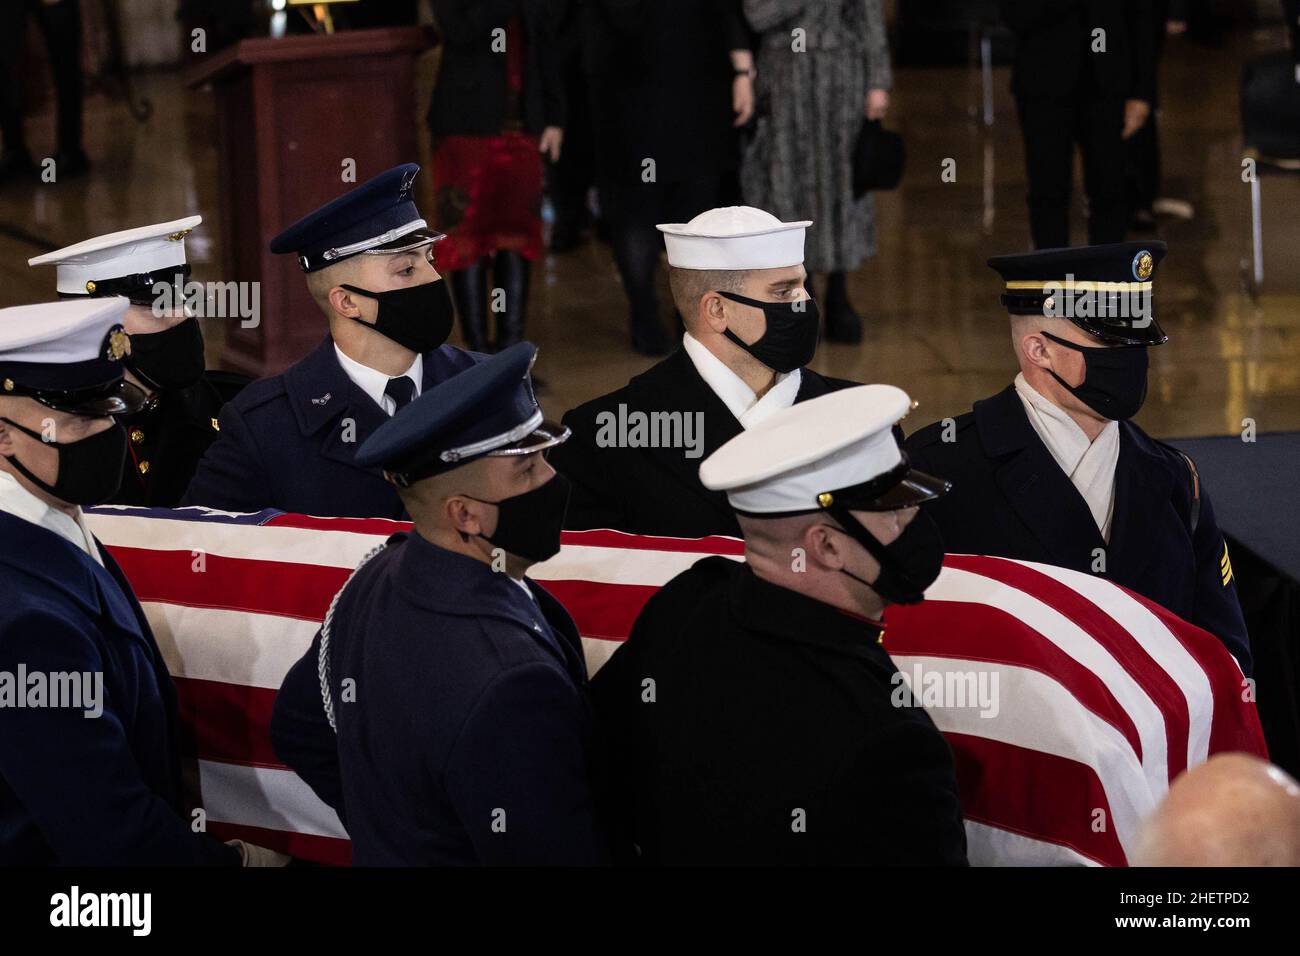 A U.S. Joint Forces bearer team carries the flag-draped casket of former Senate Majority Leader Harry Reid, D-NV, inside the U.S. Capitol where he will lie in state, Wednesday, Jan. 12, 2022, in Washington. Reid, who served five terms in the Senate, will be honored Wednesday in the Capitol Rotunda during a ceremony closed to the public under COVID-19 protocols.Credit: Graeme Jennings/Pool via CNP /MediaPunch Stock Photo